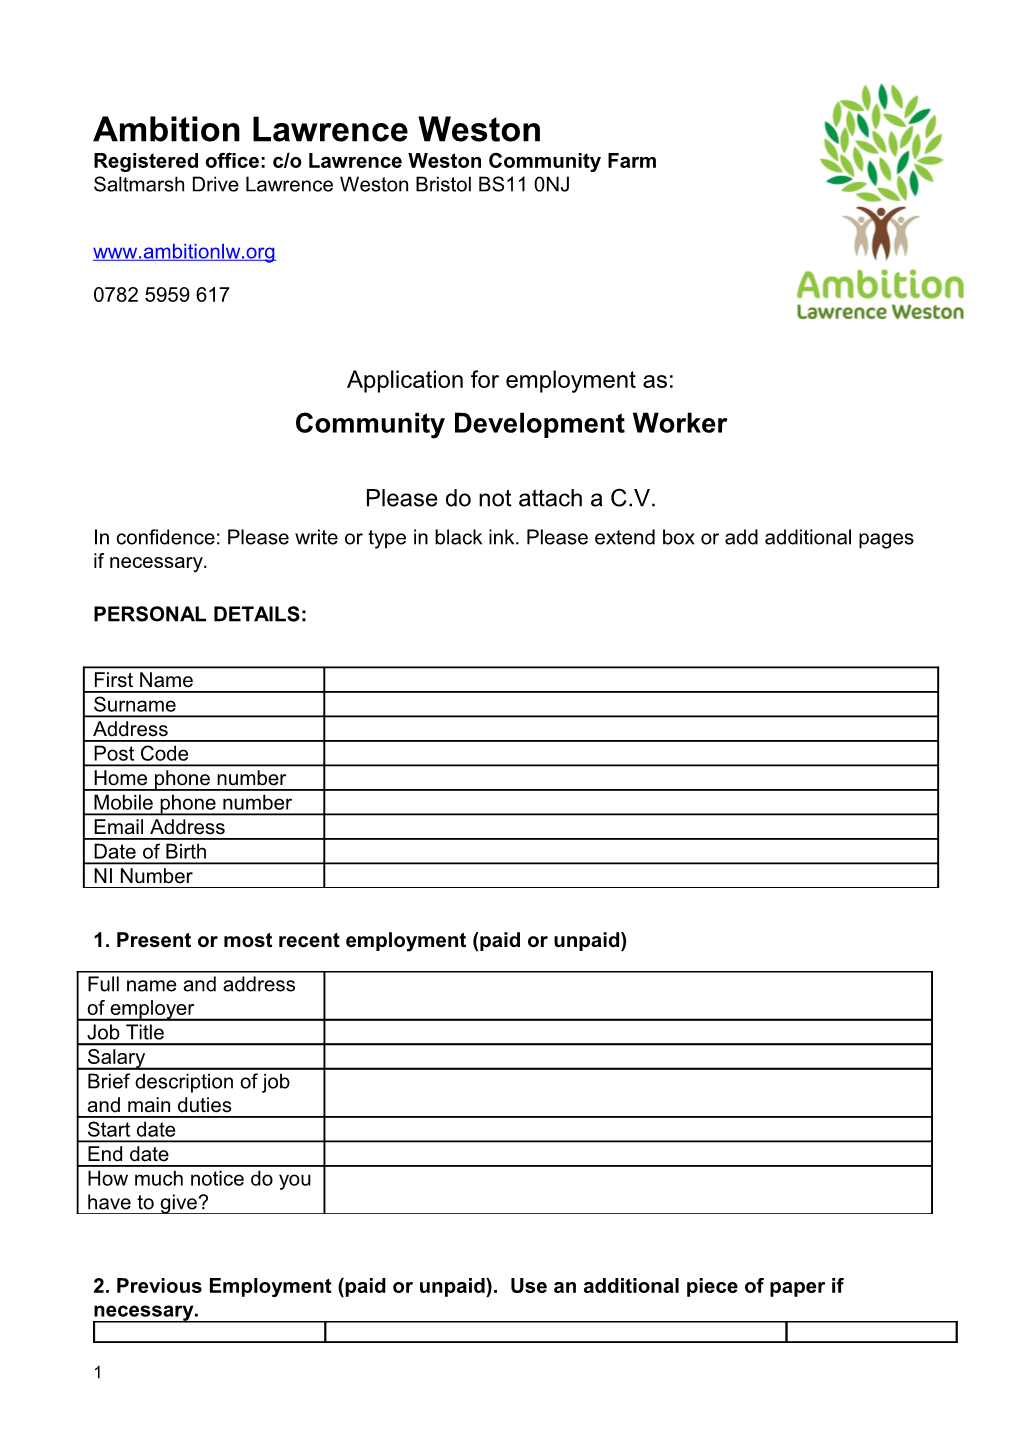 Application Form Blank Ambition Lawrence Weston